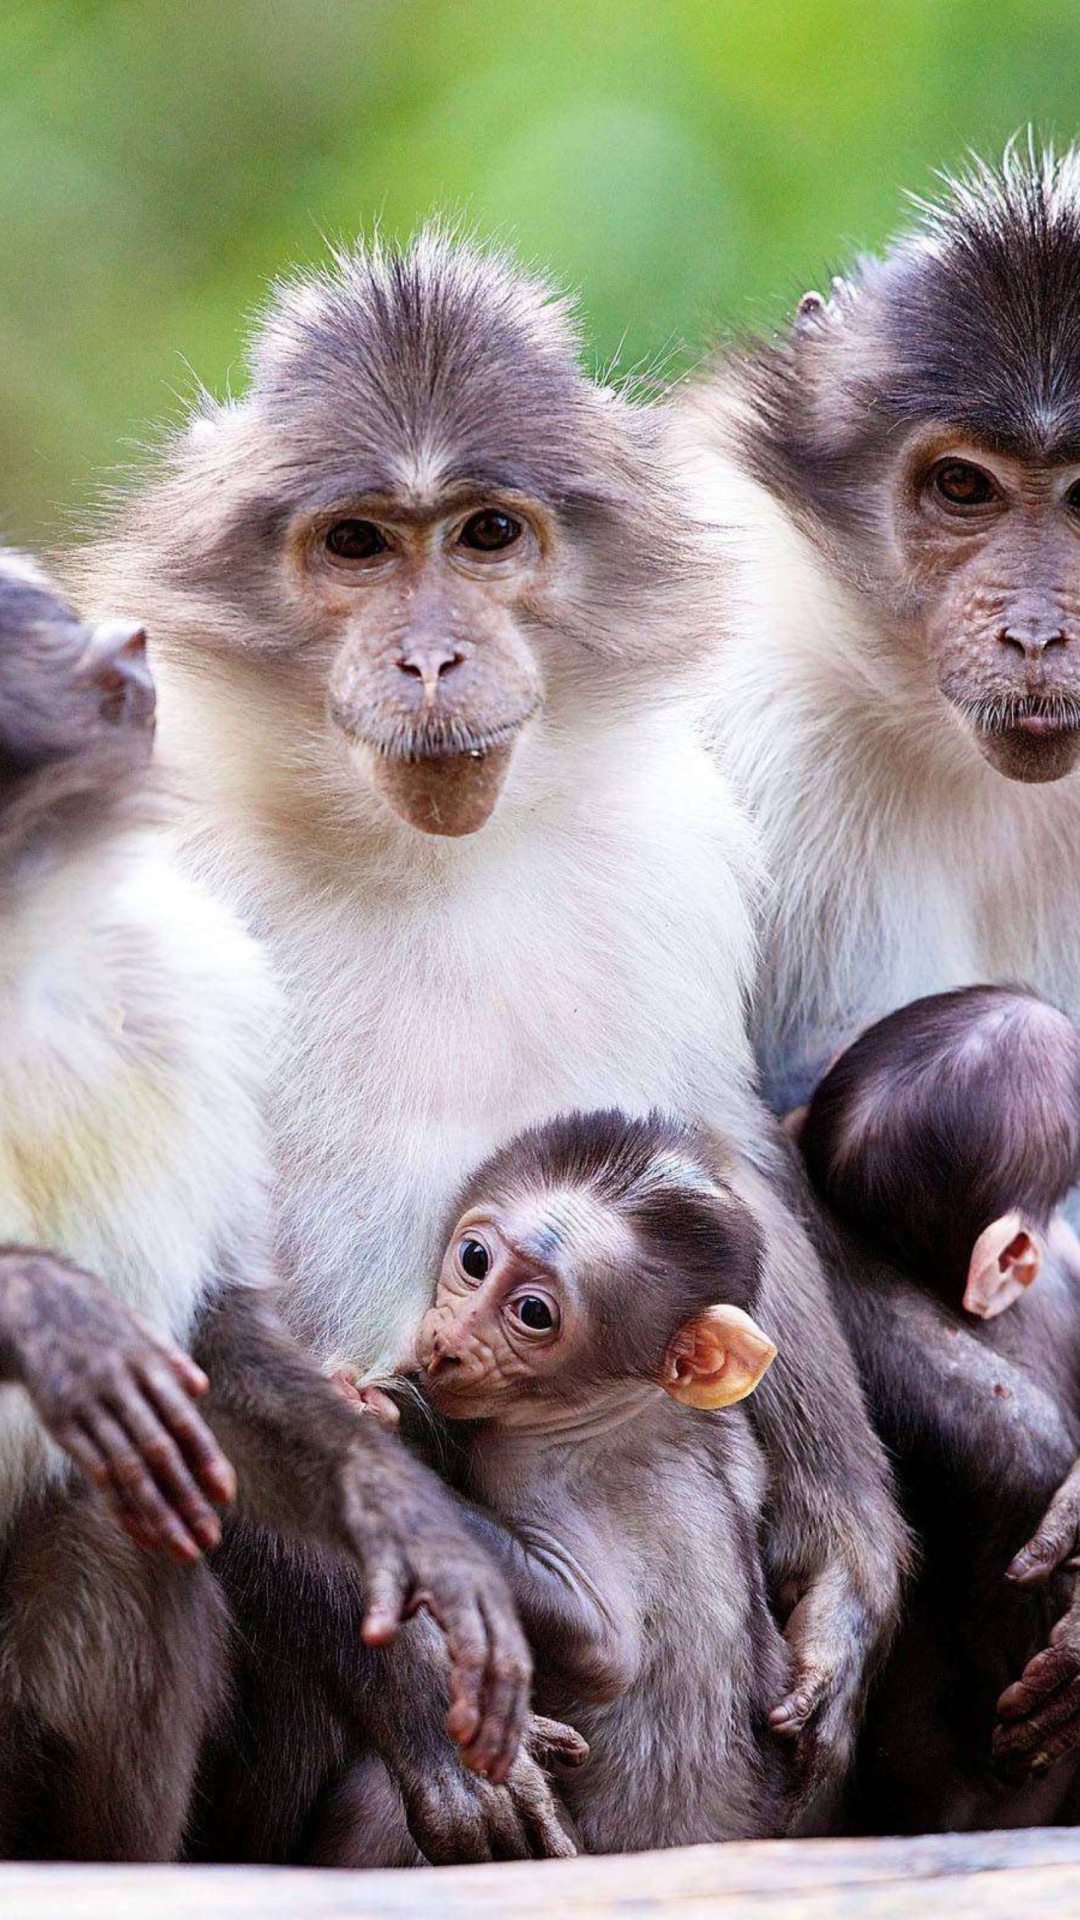 Funny Monkeys With Their Babies wallpaper 1080x1920